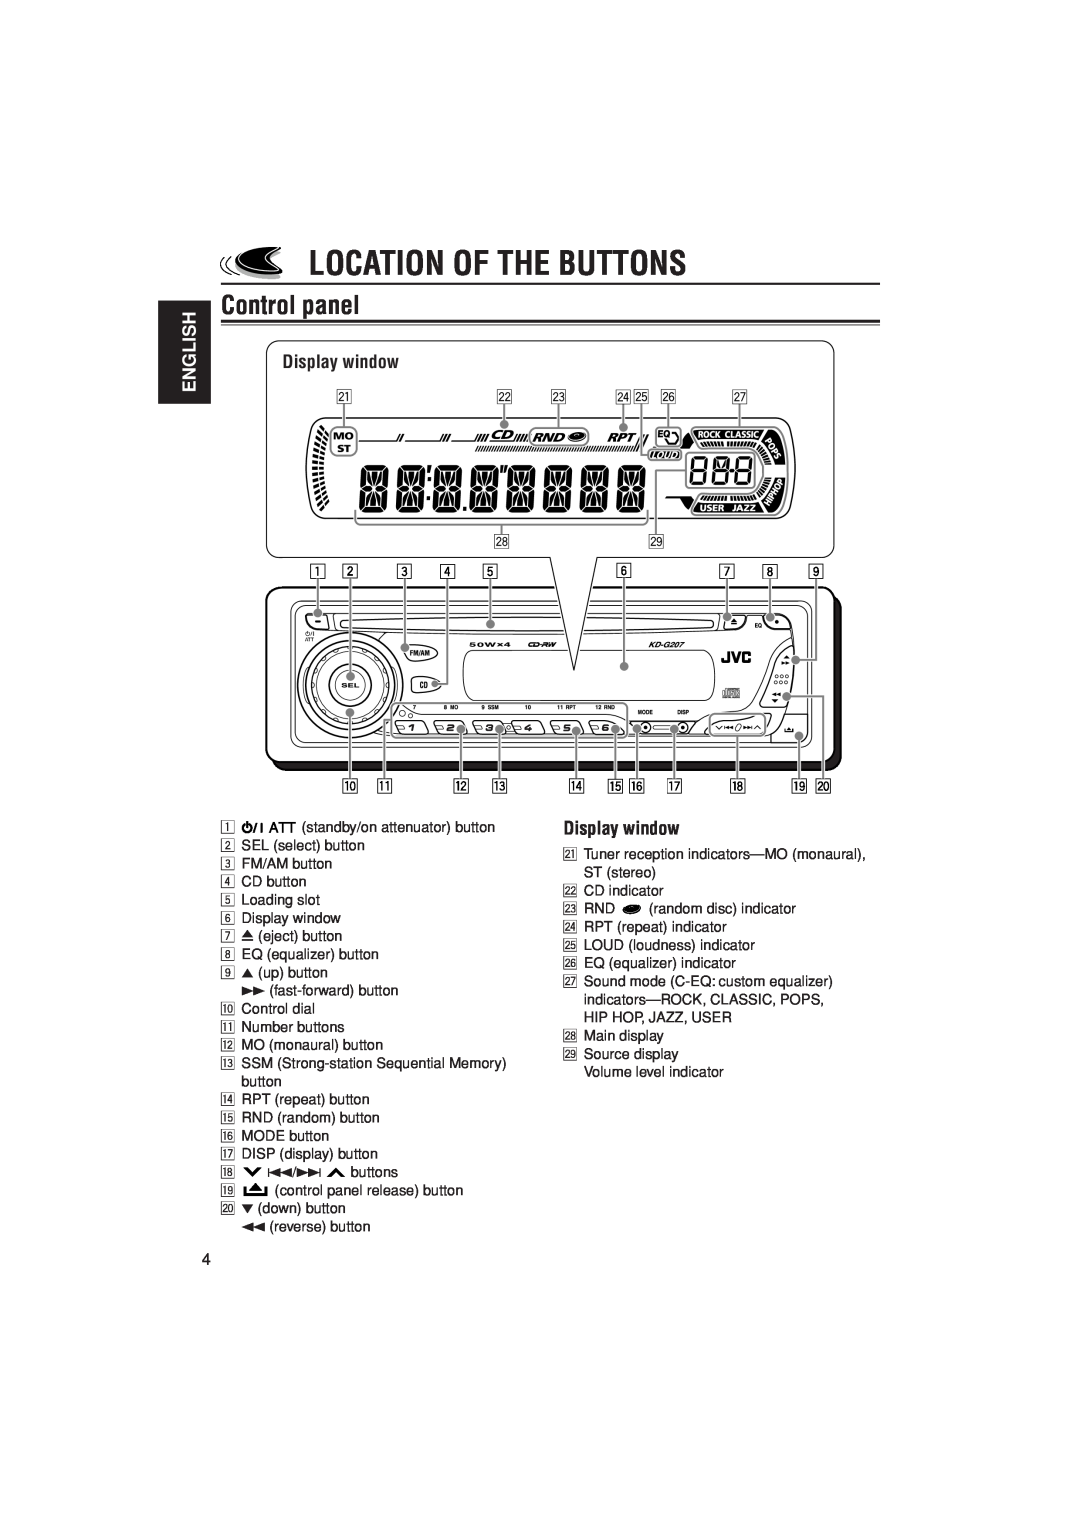 JVC KD-G202, KD-G201 manual Location Of The Buttons, Control panel, English, Display window 